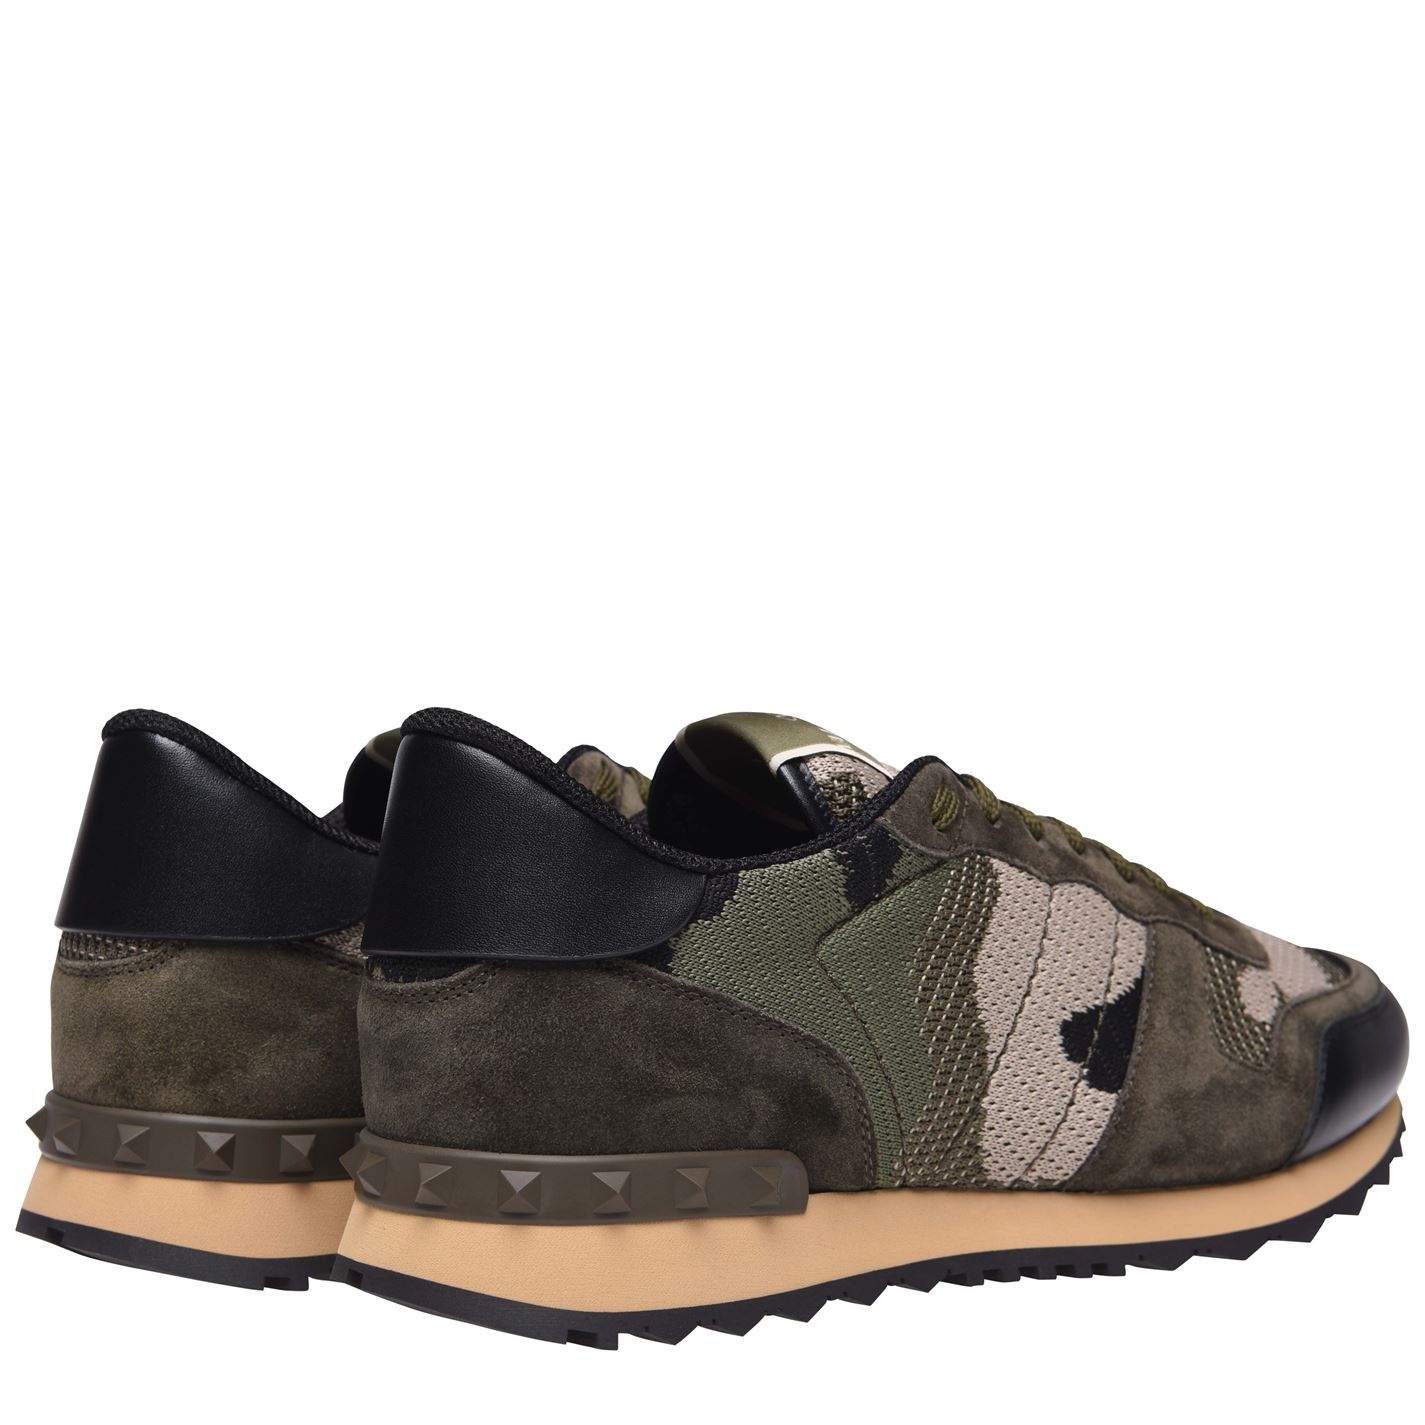 MESH CAMOUFLAGE ROCKRUNNER TRAINERS - 4